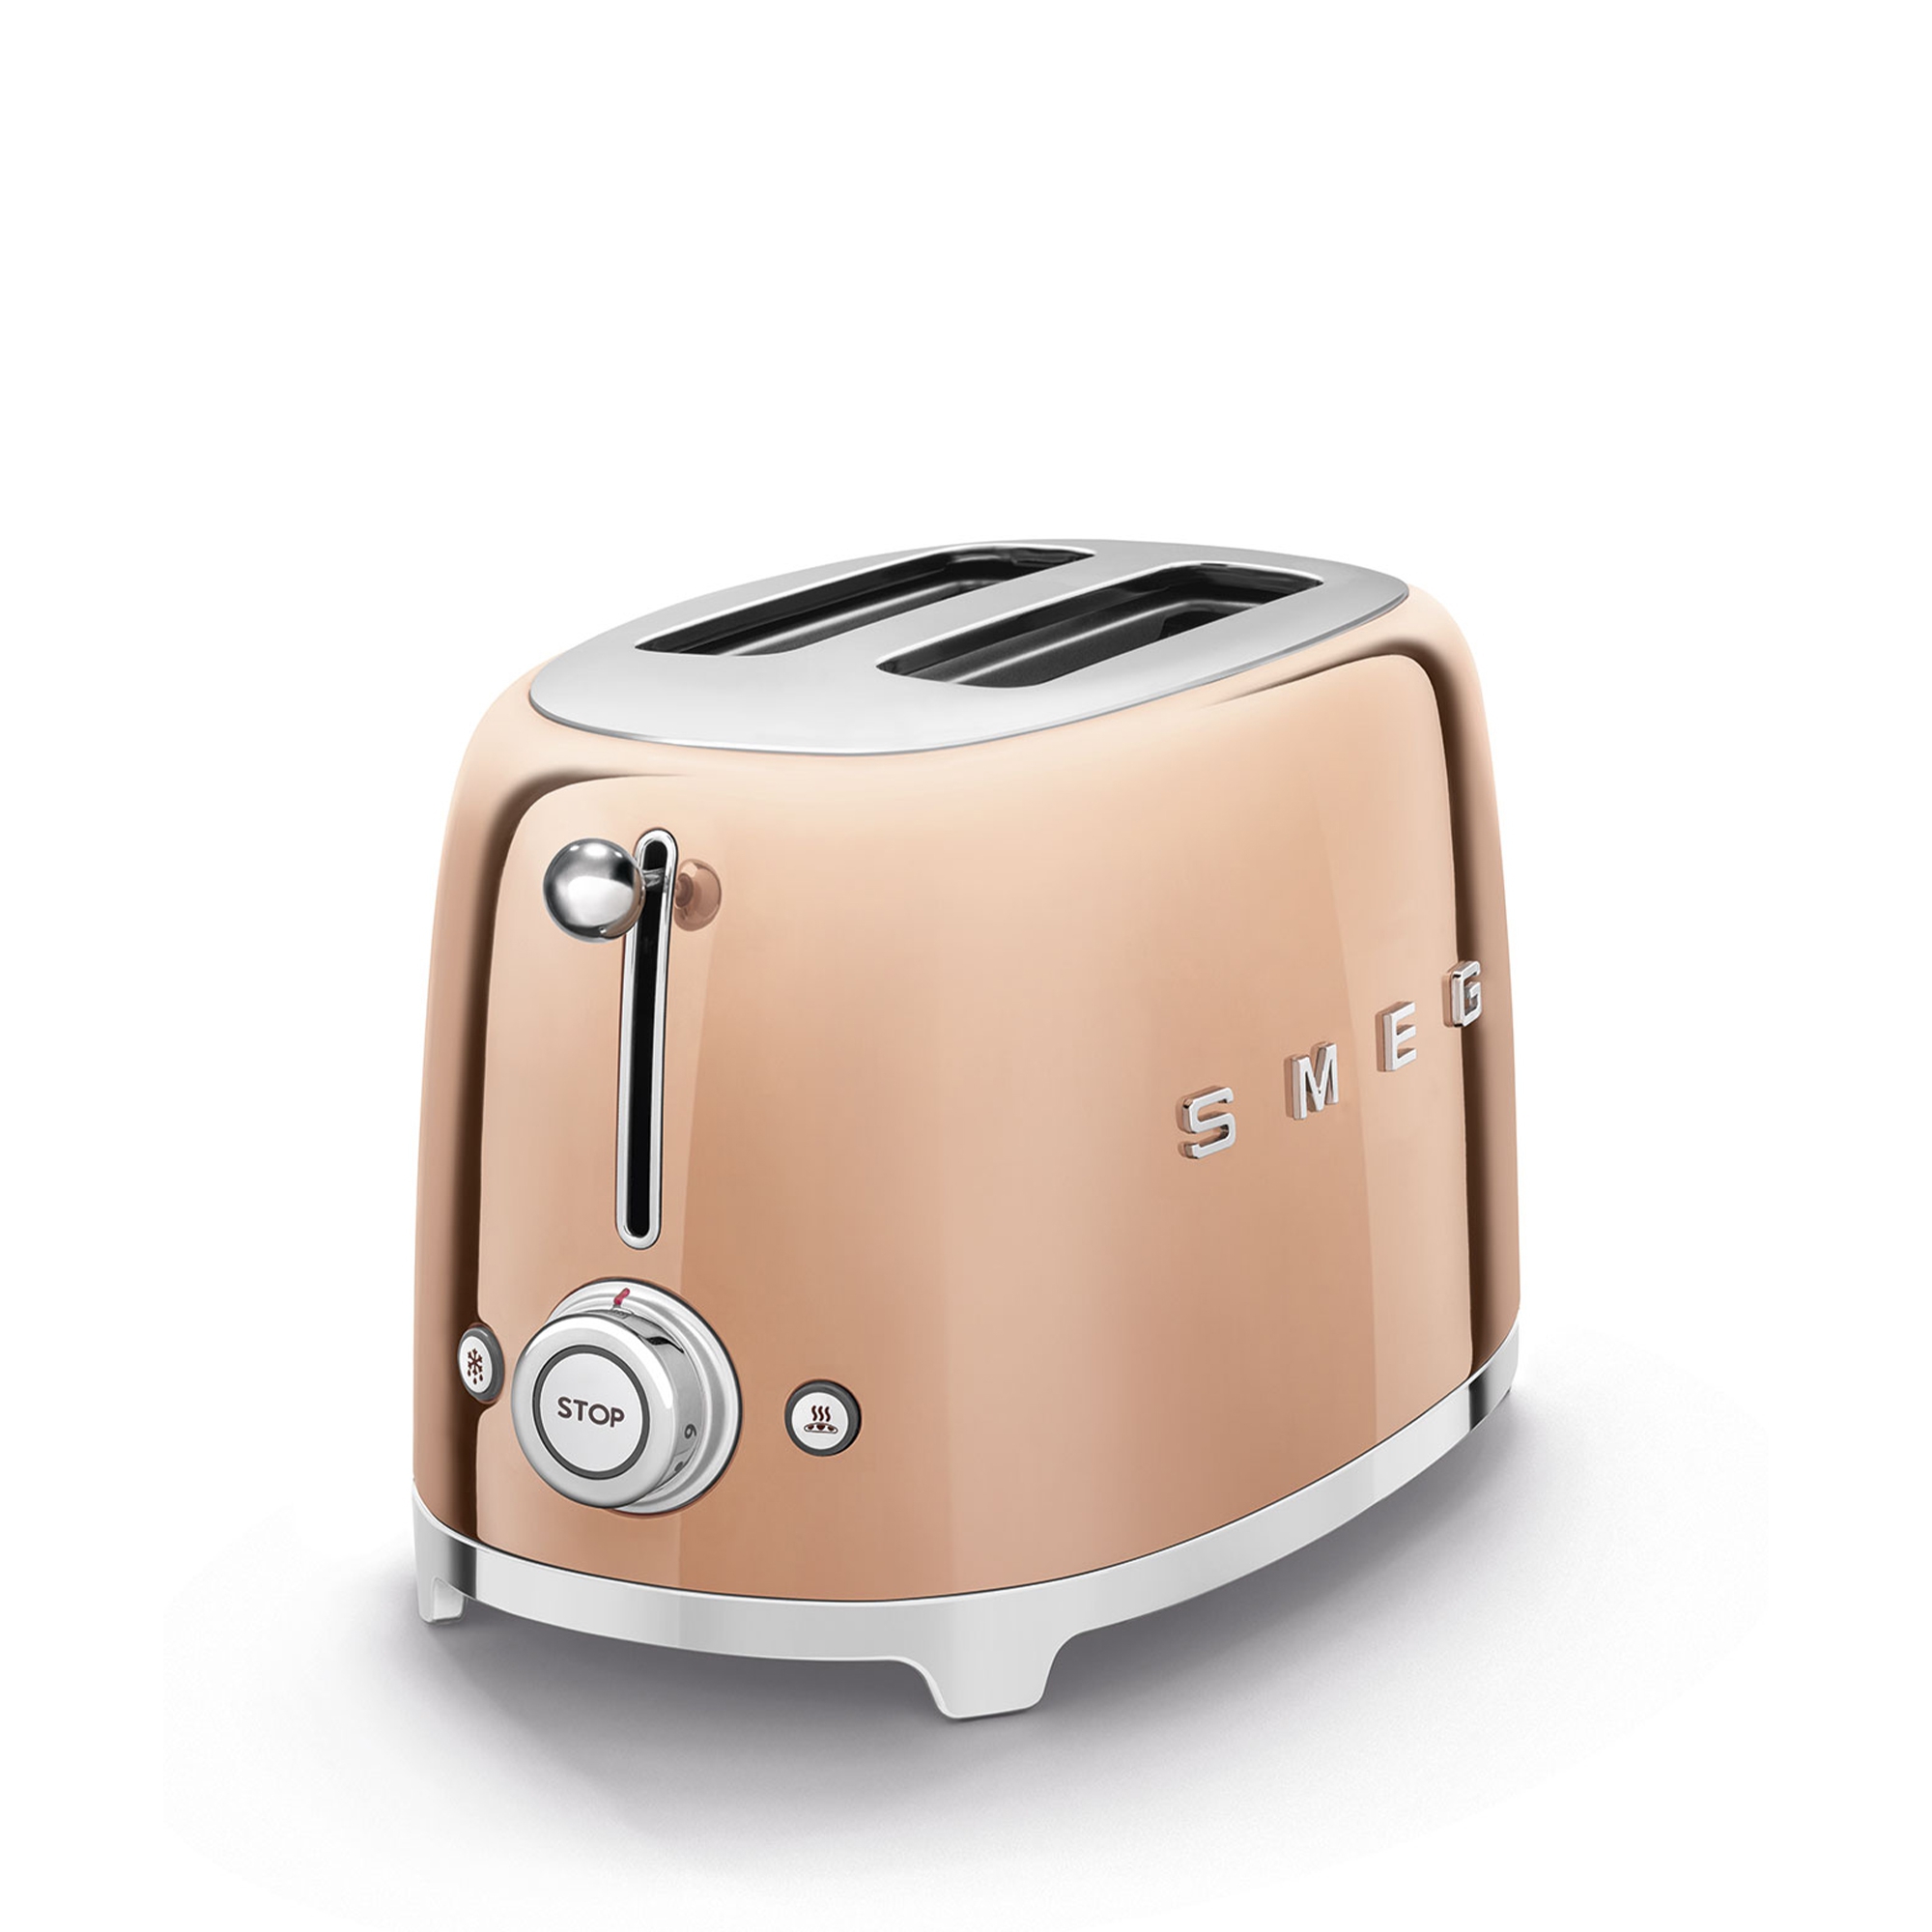 Smeg - 2-slot toaster compact - design line style The 50 ° years - rosé gold